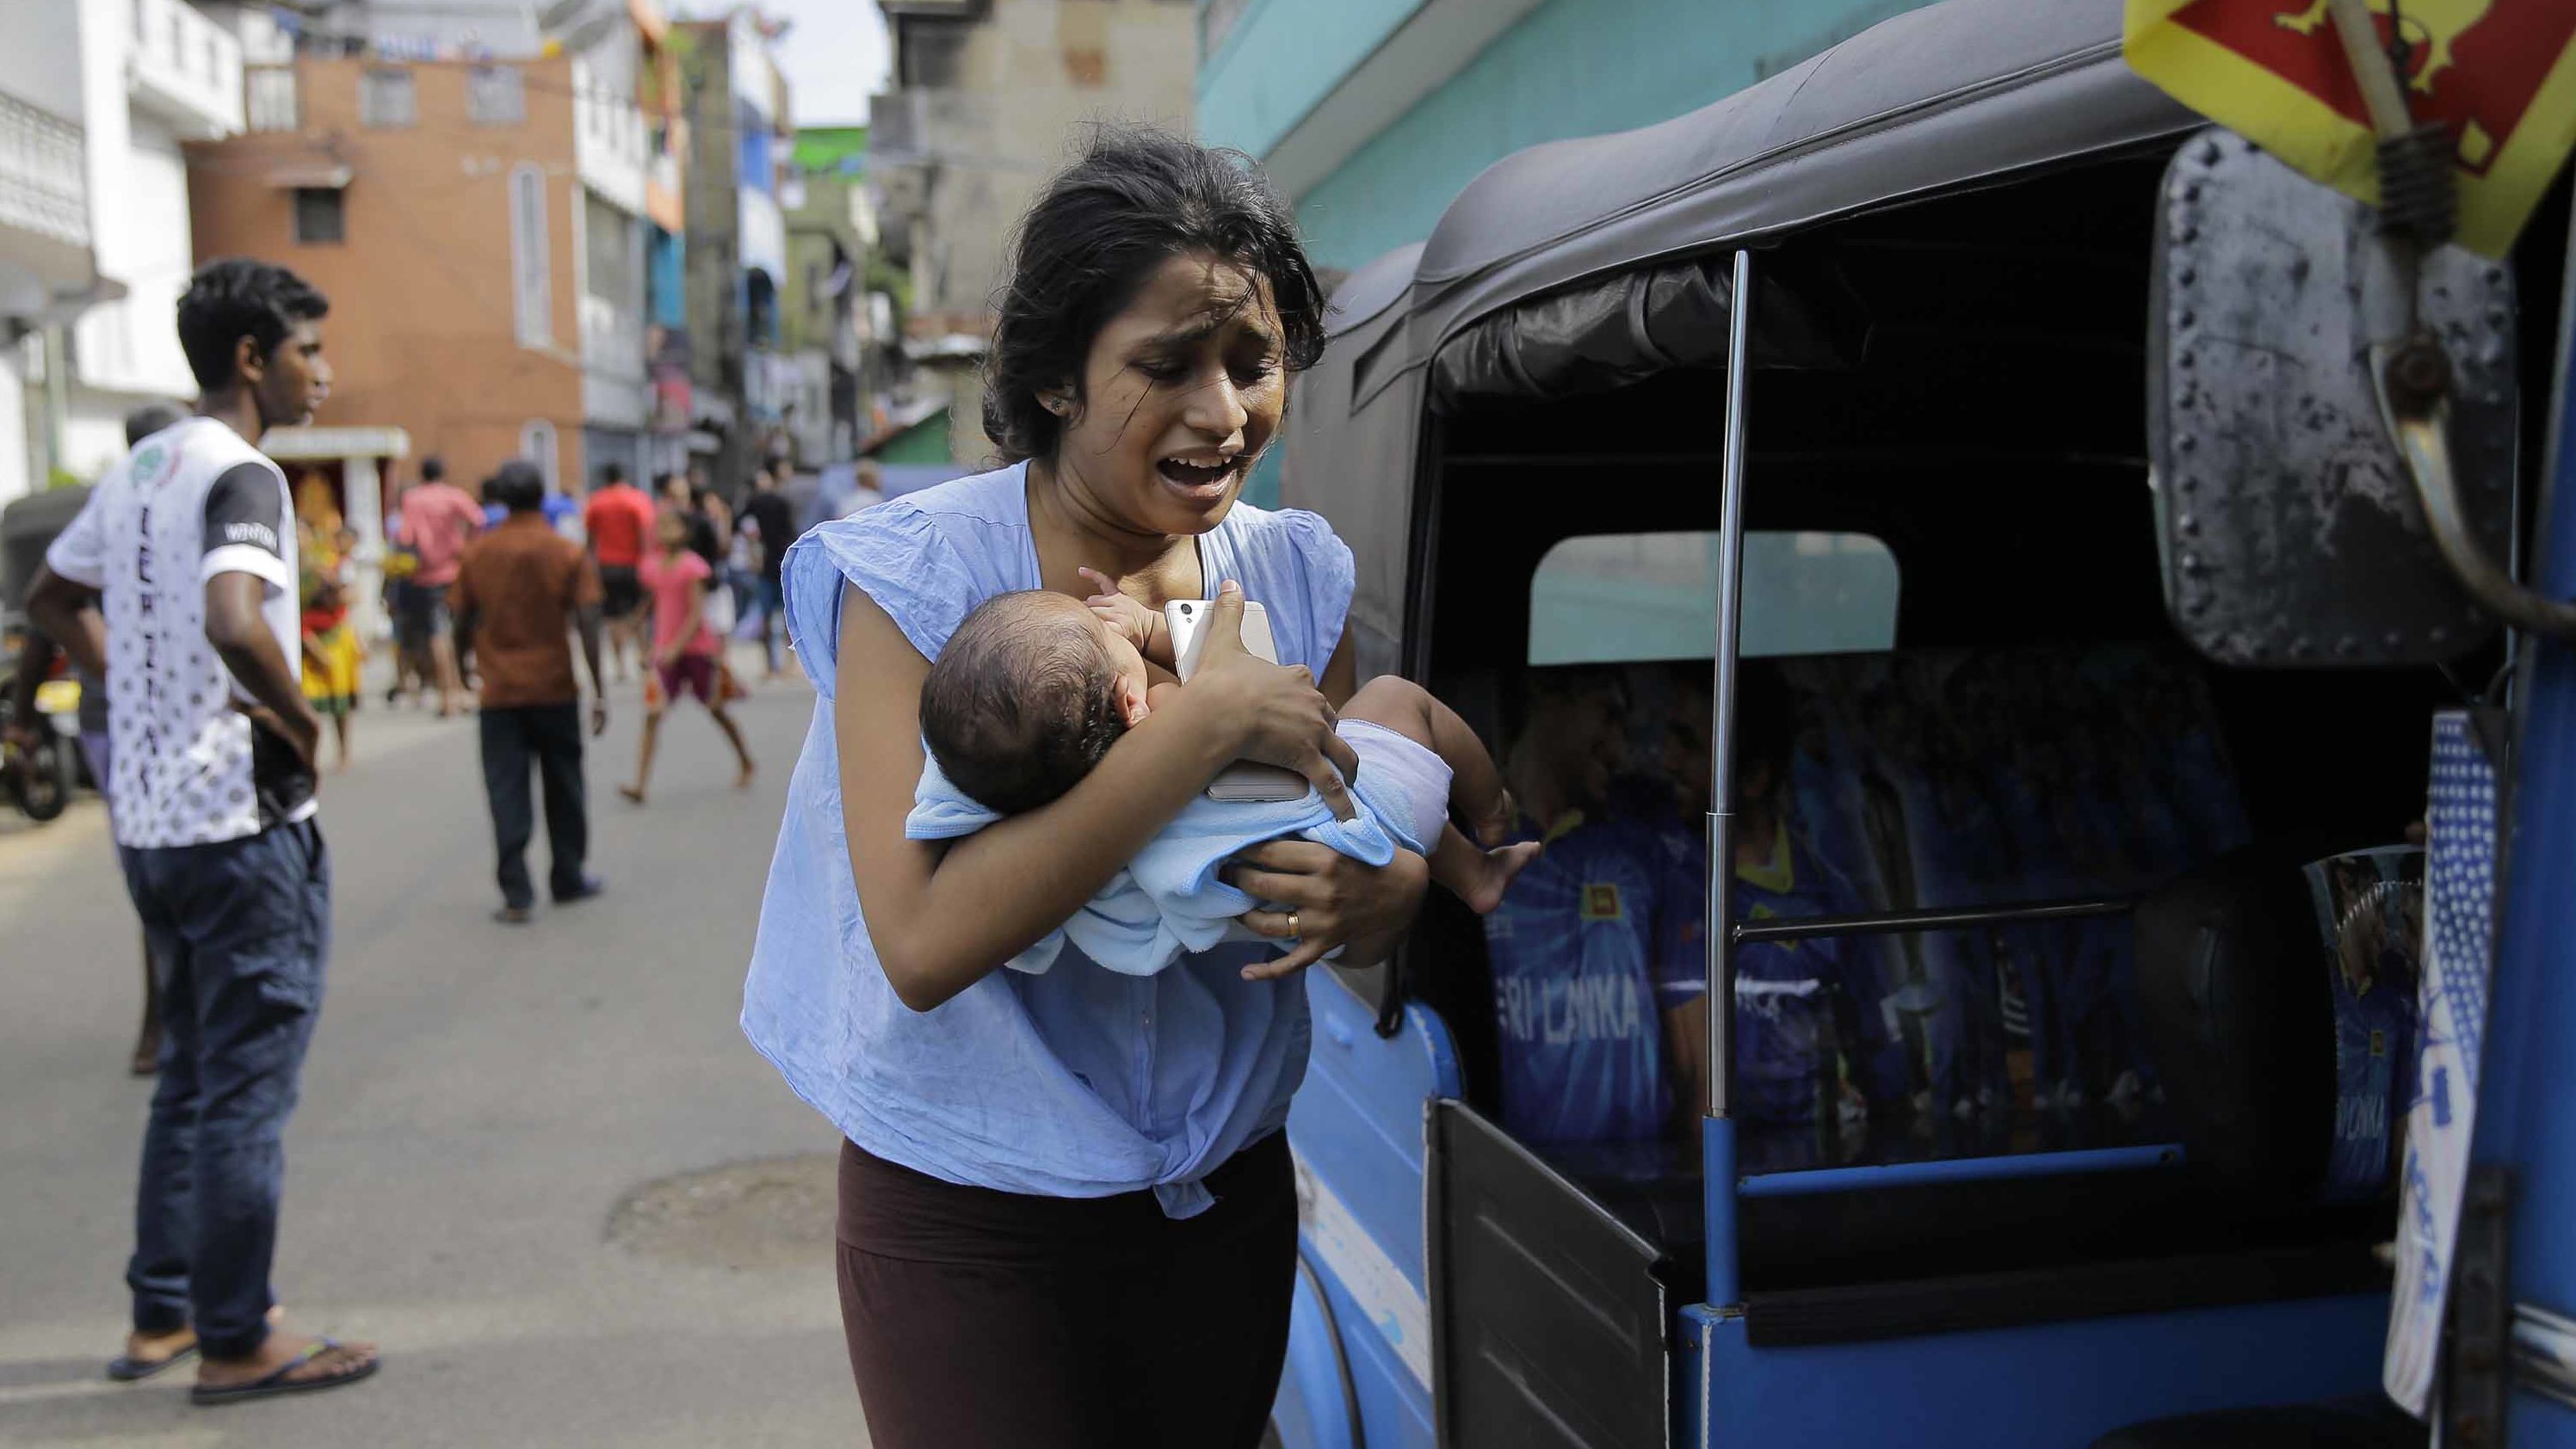 A woman carrying an infant runs for safety after police found a suspicious vehicle parked in Colombo, Sri Lanka, on Monday, April 22, a day after several coordinated bombings across the country killed hundreds.